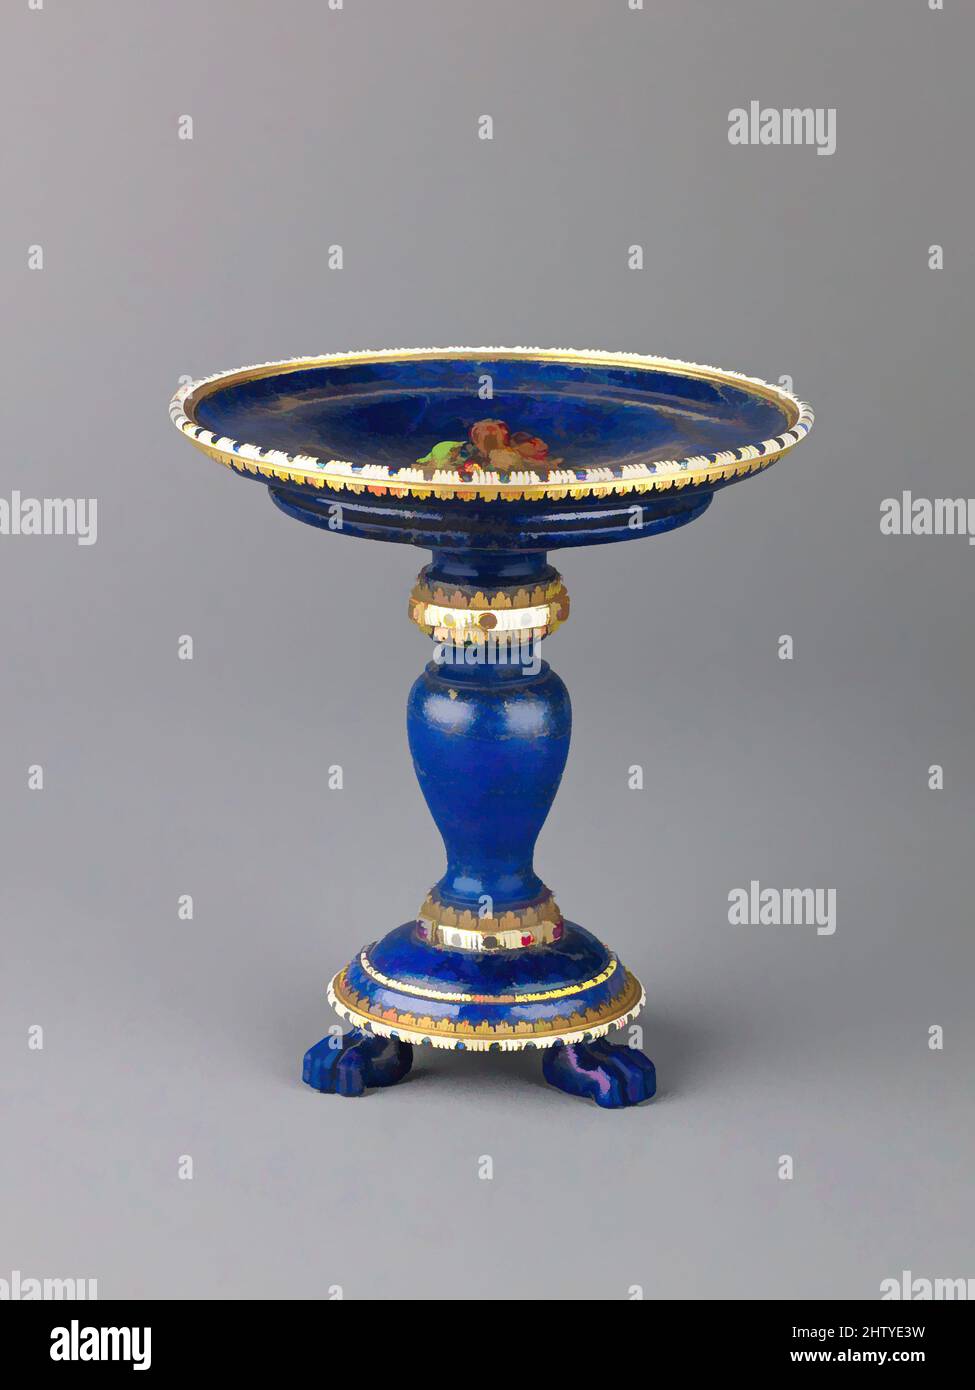 Art inspired by Tazza, last quarter 19th century, probably French, Lapis lazuli, gold enamel, and rubies., H. 95 cm, diam. of cup 89 cm, Classic works modernized by Artotop with a splash of modernity. Shapes, color and value, eye-catching visual impact on art. Emotions through freedom of artworks in a contemporary way. A timeless message pursuing a wildly creative new direction. Artists turning to the digital medium and creating the Artotop NFT Stock Photo